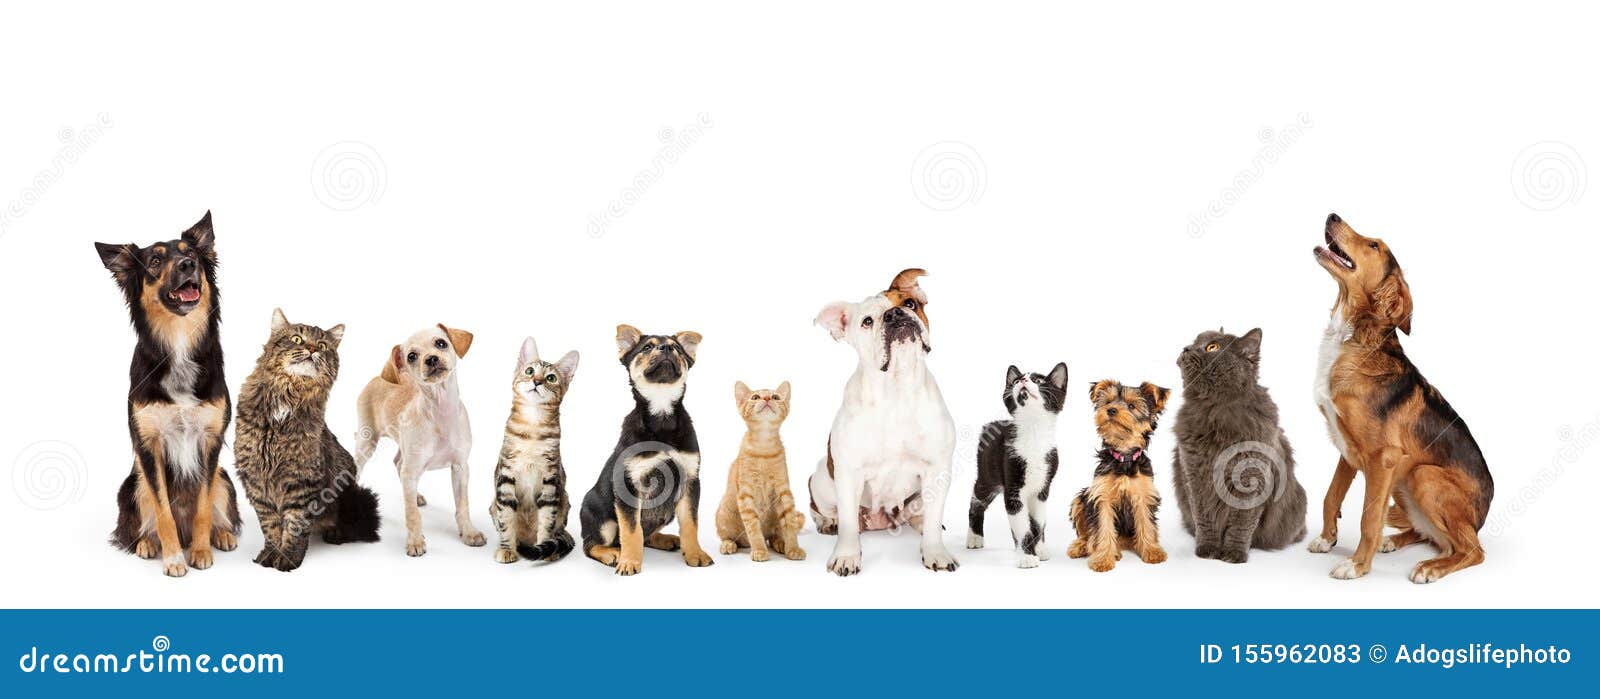 dogs and cats looking up into web banner